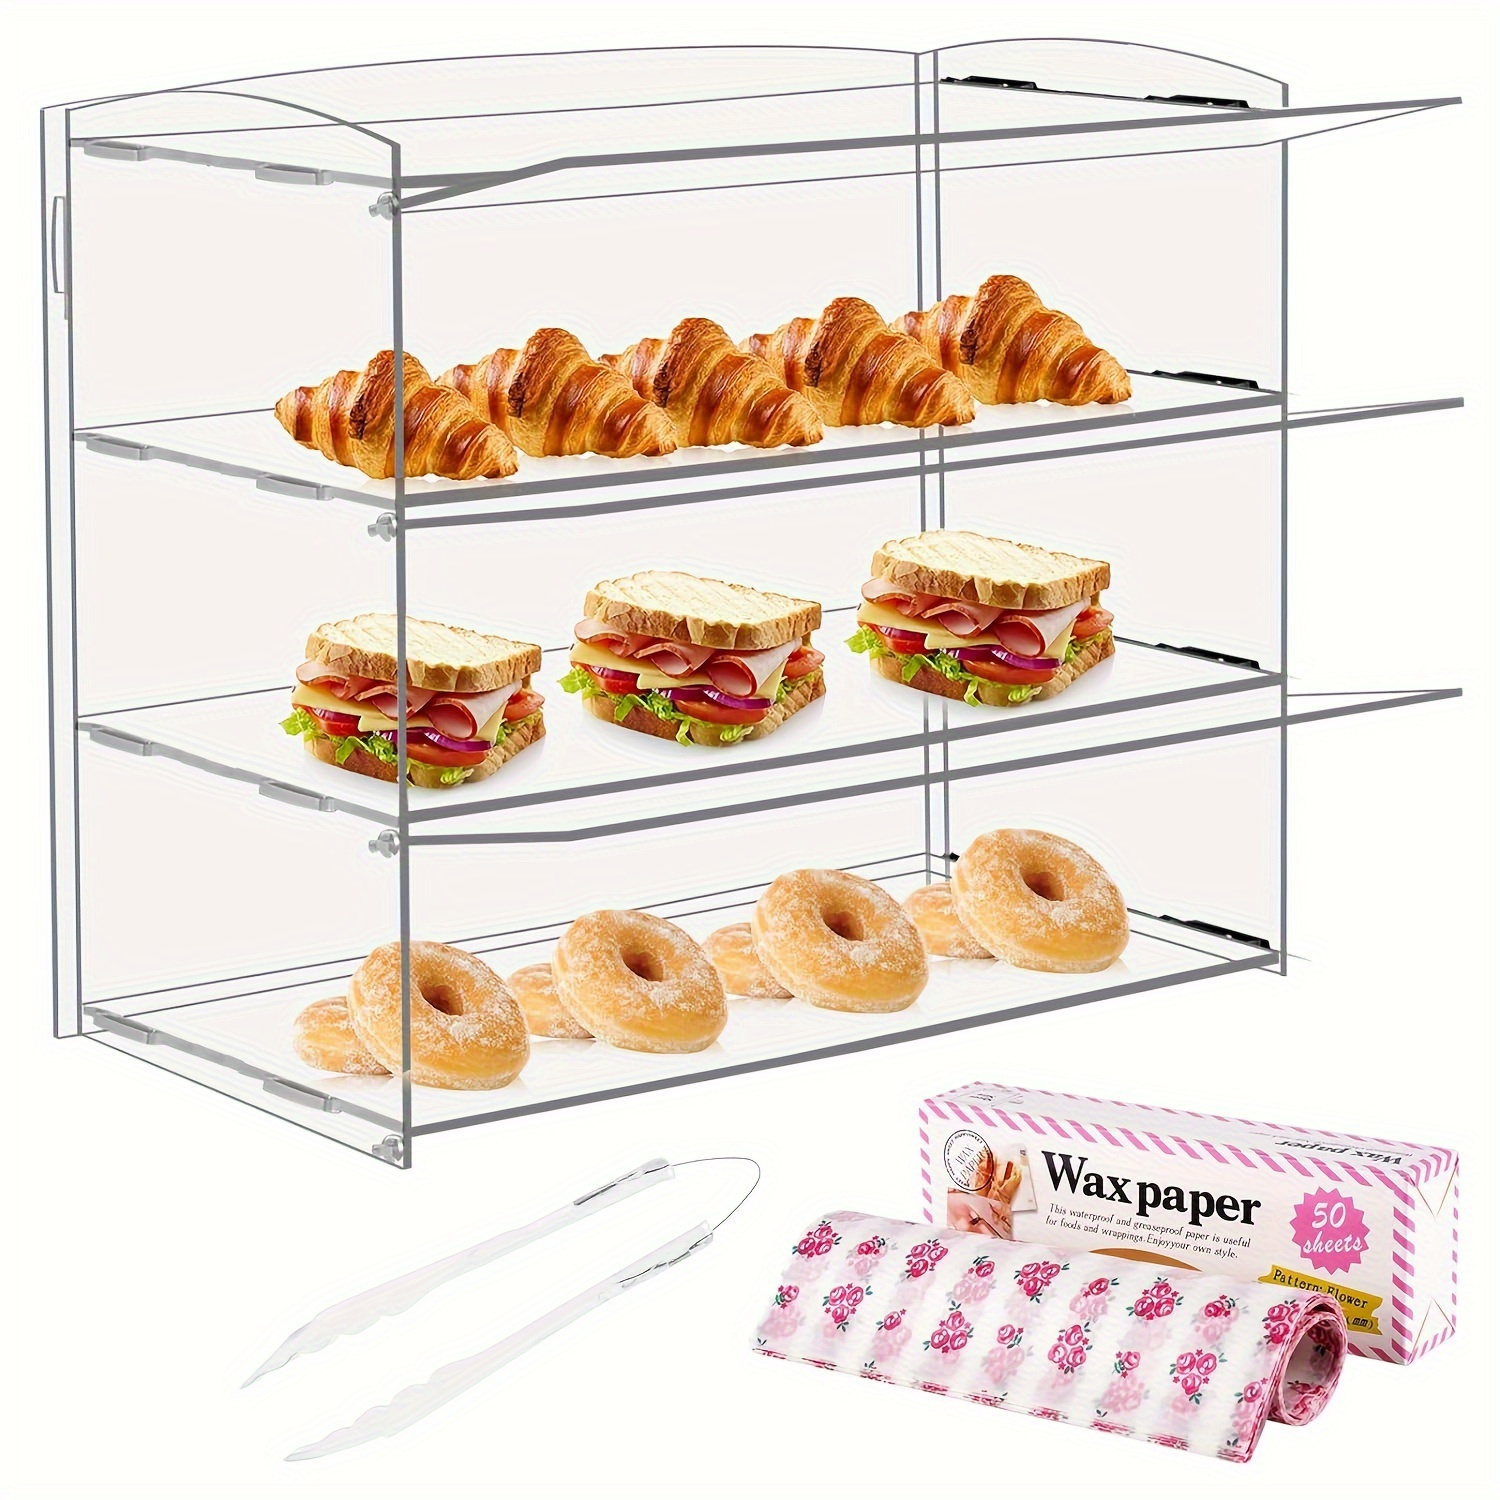 

Versatile Acrylic Display Case For Bakery - 2/3 Tier Detachable, Transparent Showcase For Bread, Pastries, Donuts & Cupcakes